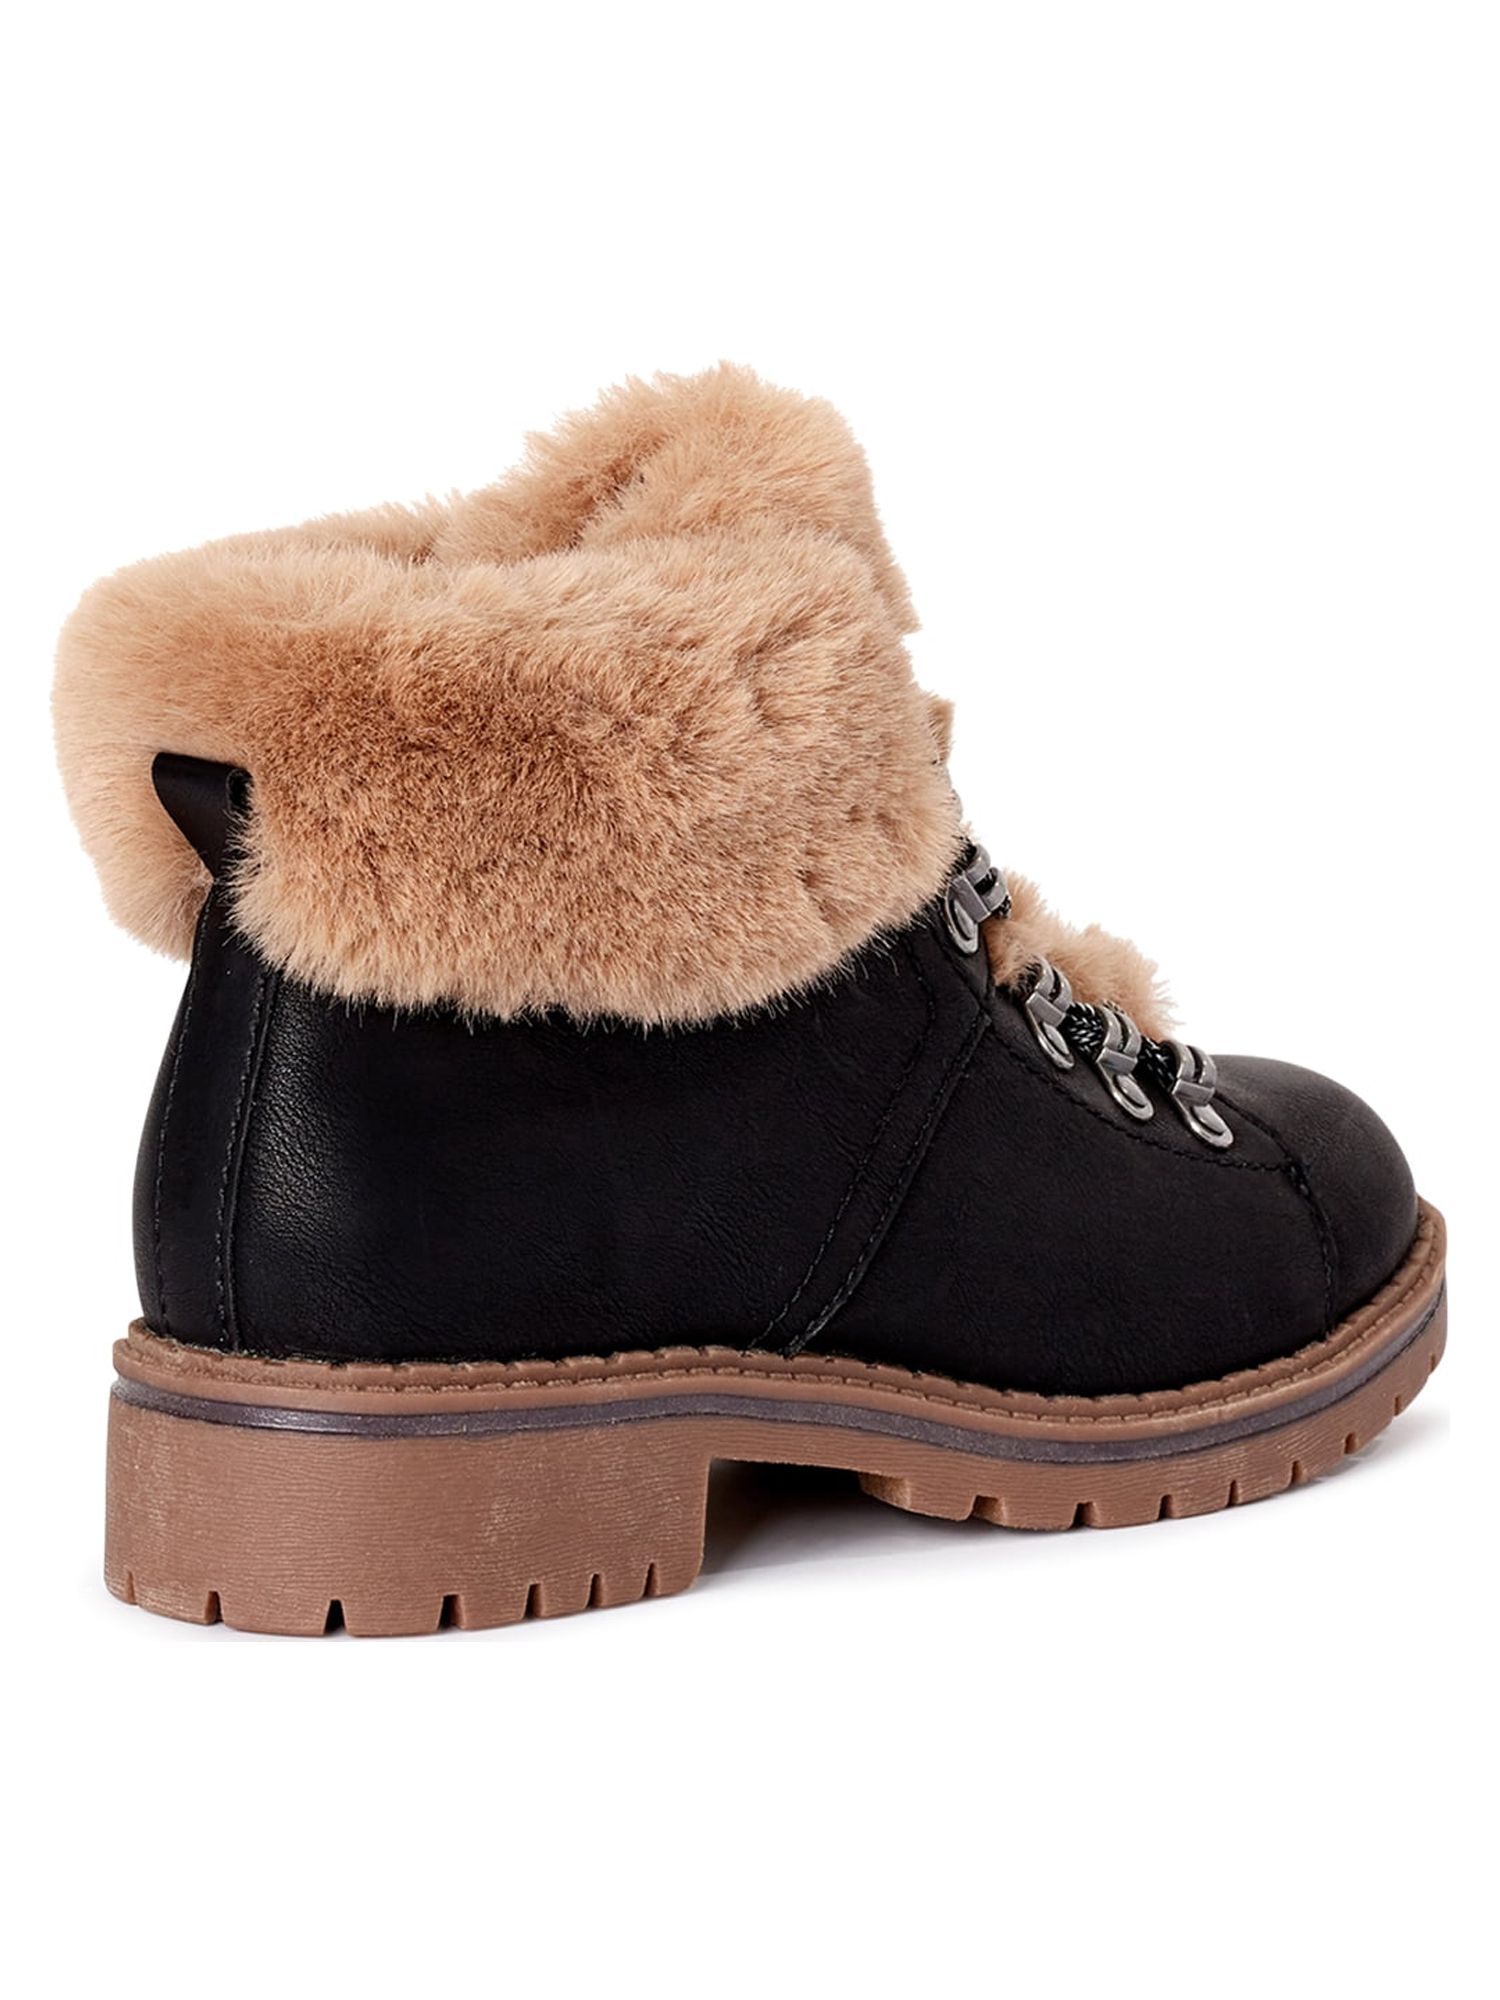 Time and Tru Women’s Faux Fur Hiker Boots - image 4 of 6